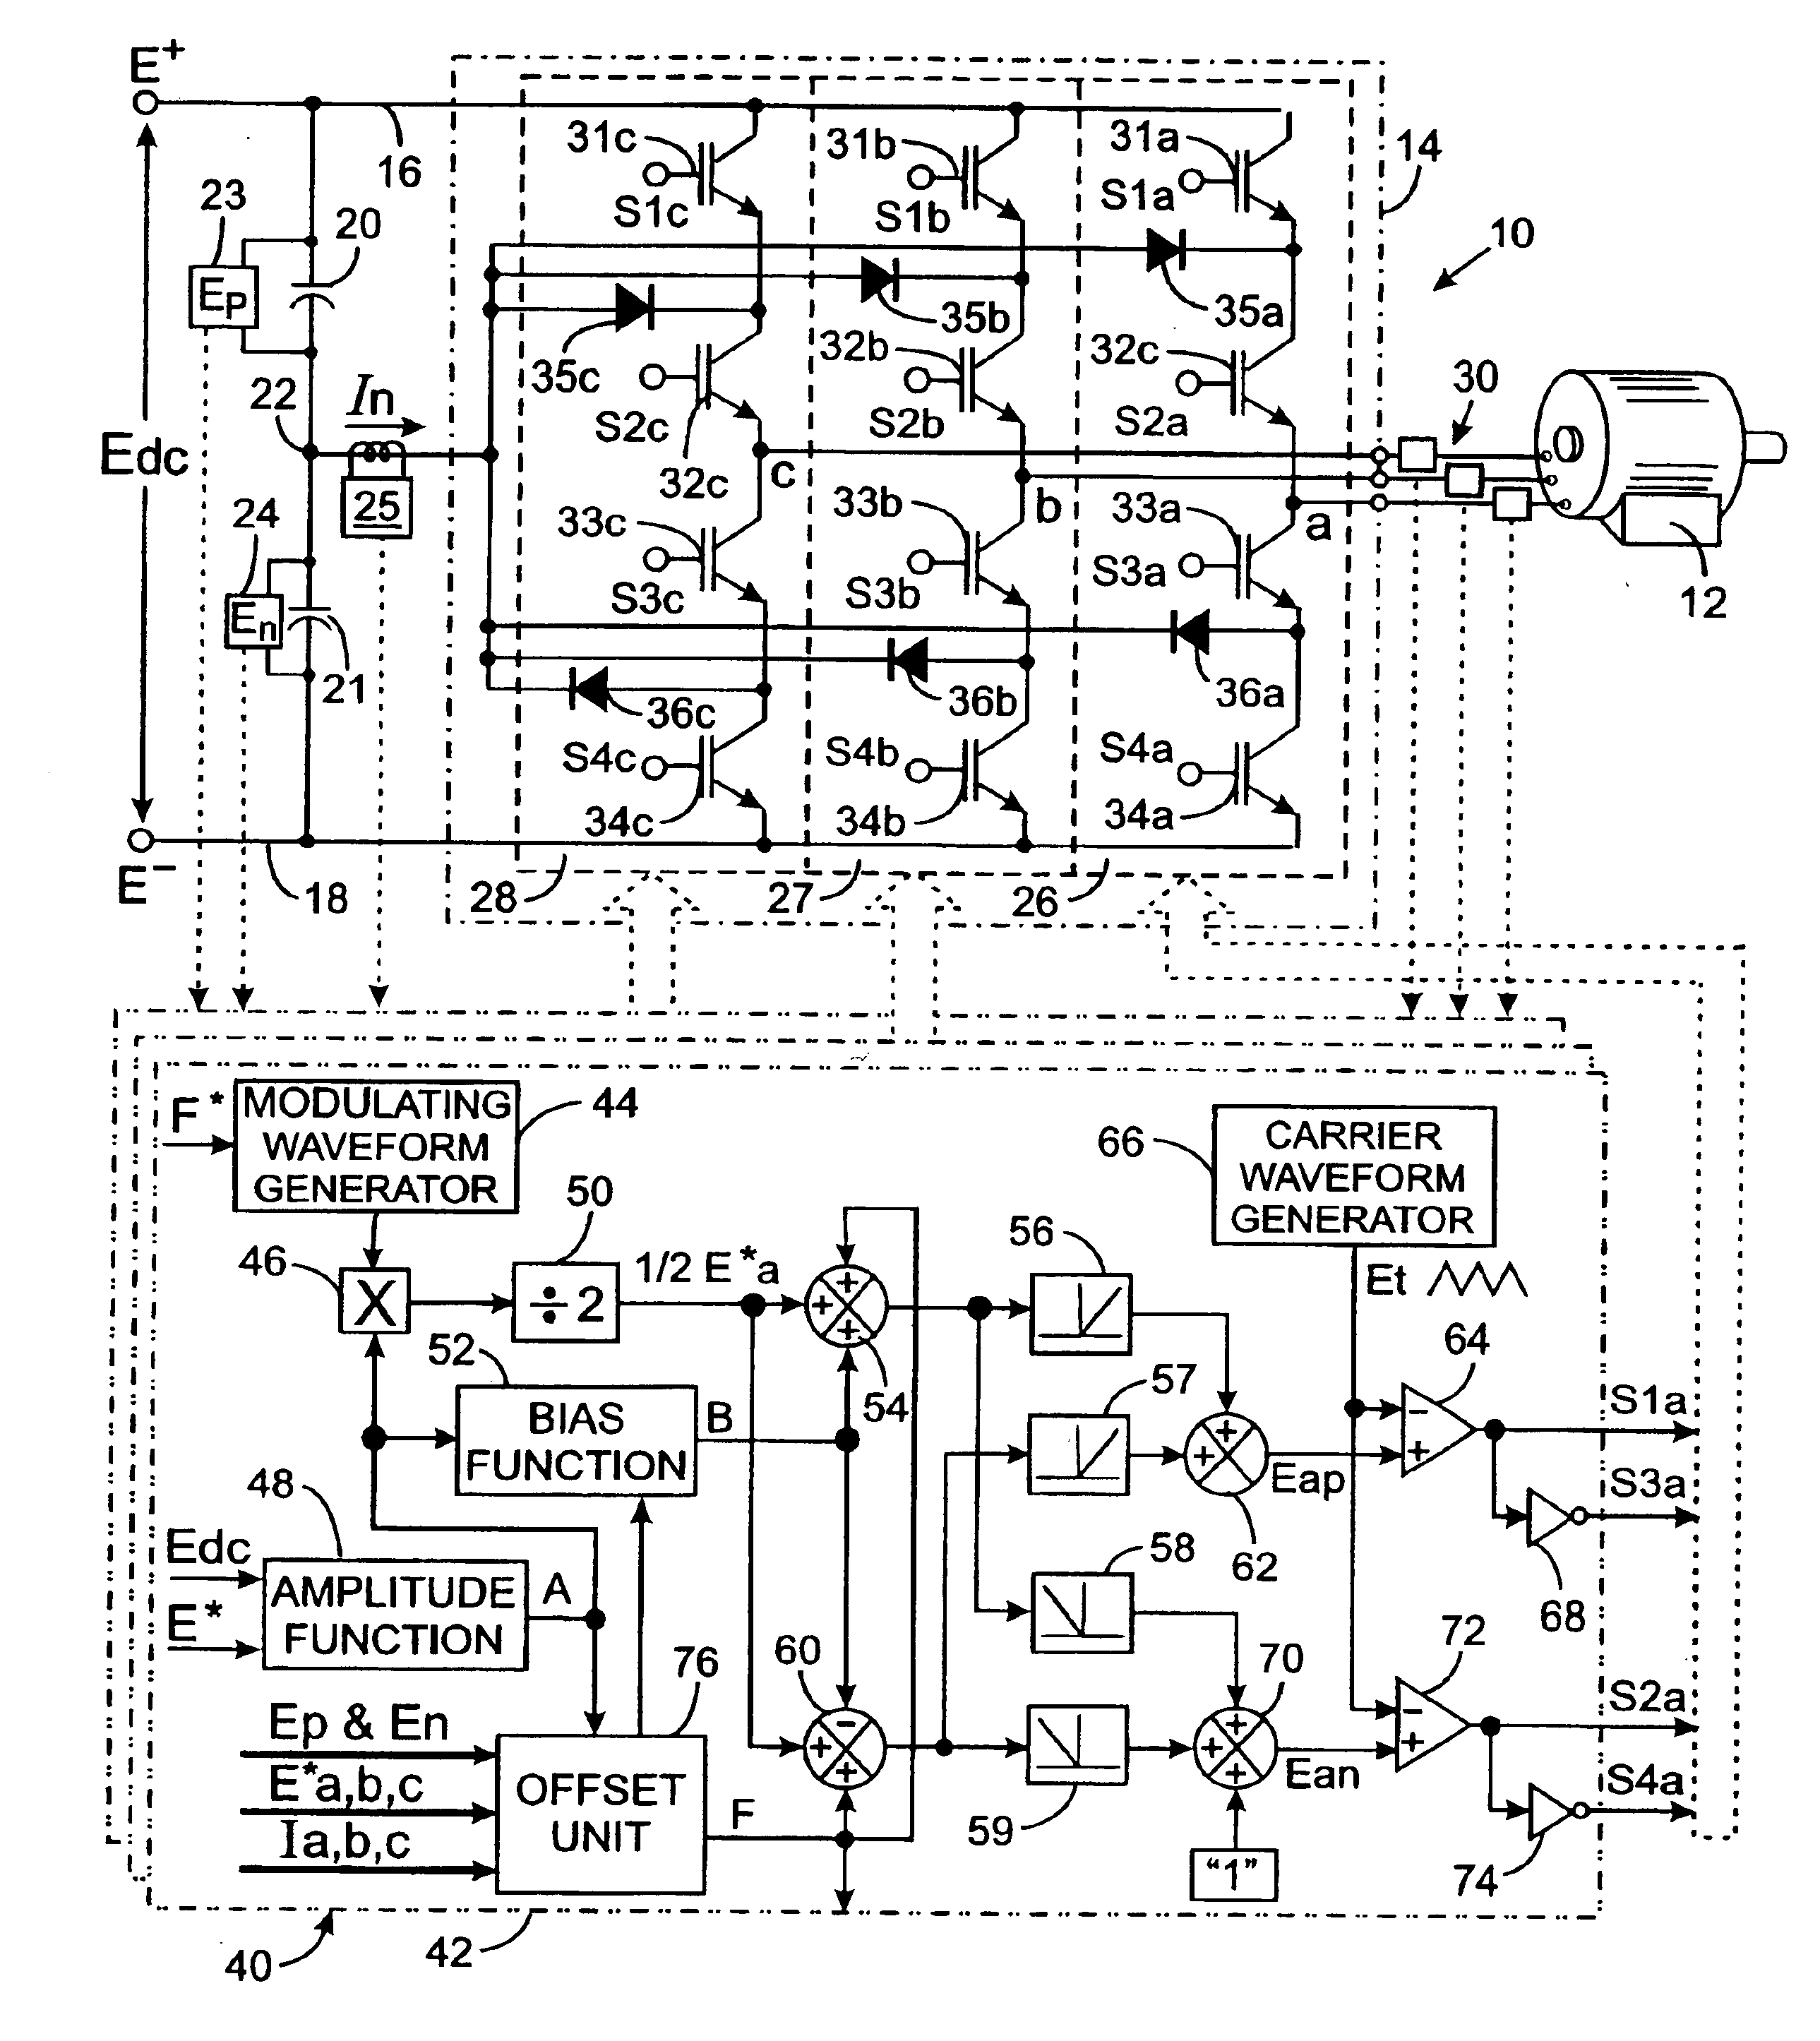 Capacitor charge balancing technique for a three-level PWM power converter